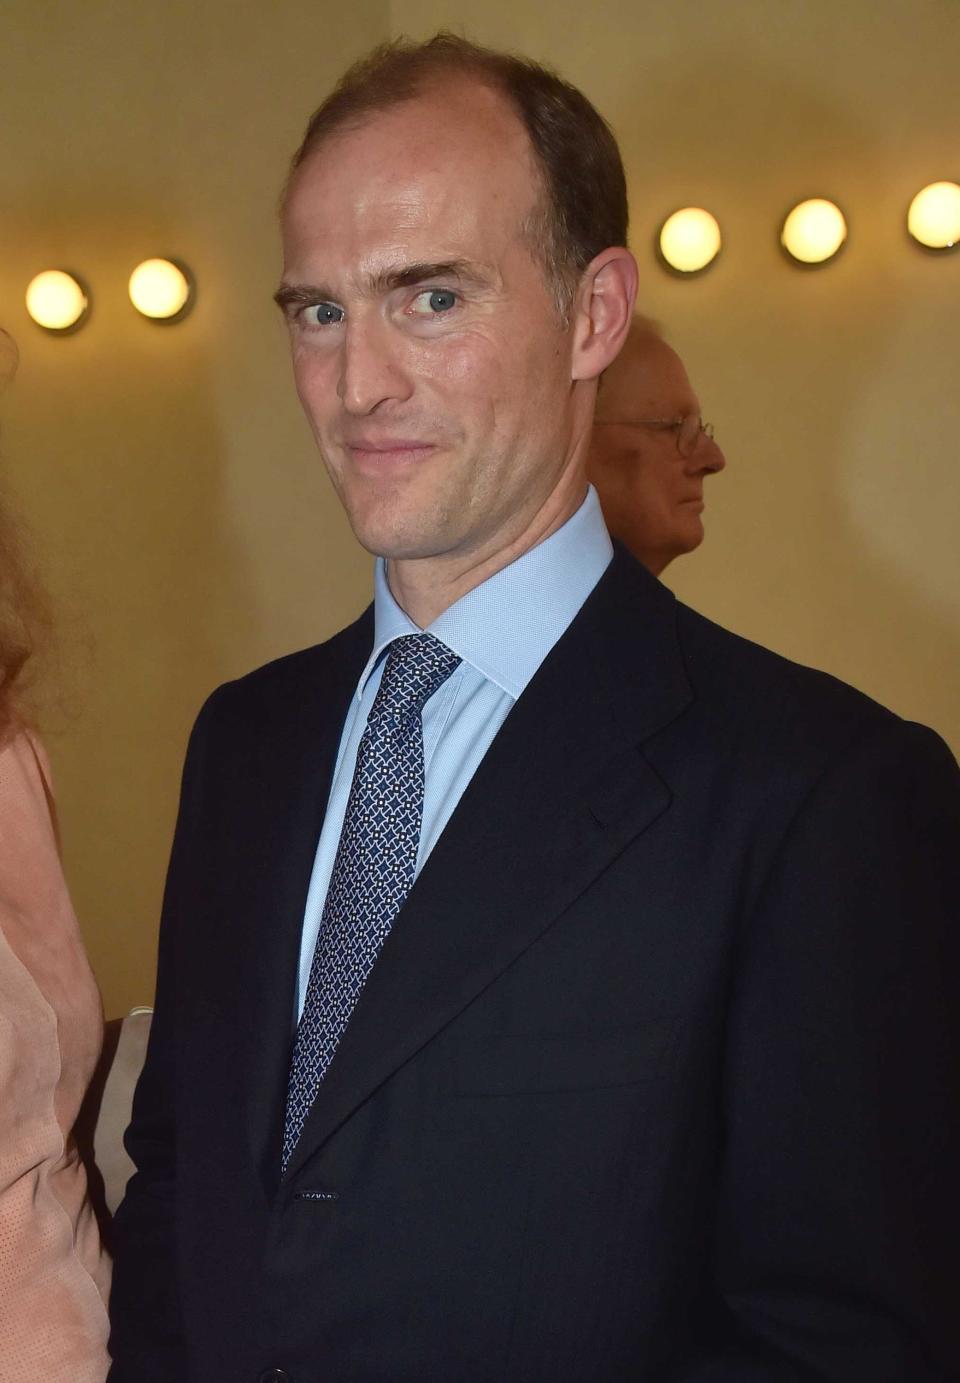 Prince Donatus, Landgrave of Hesse, who is one of the 30 guests who will be in attendance at the Duke of Edinburgh's funeral at Windsor Castle on SaturdayPA